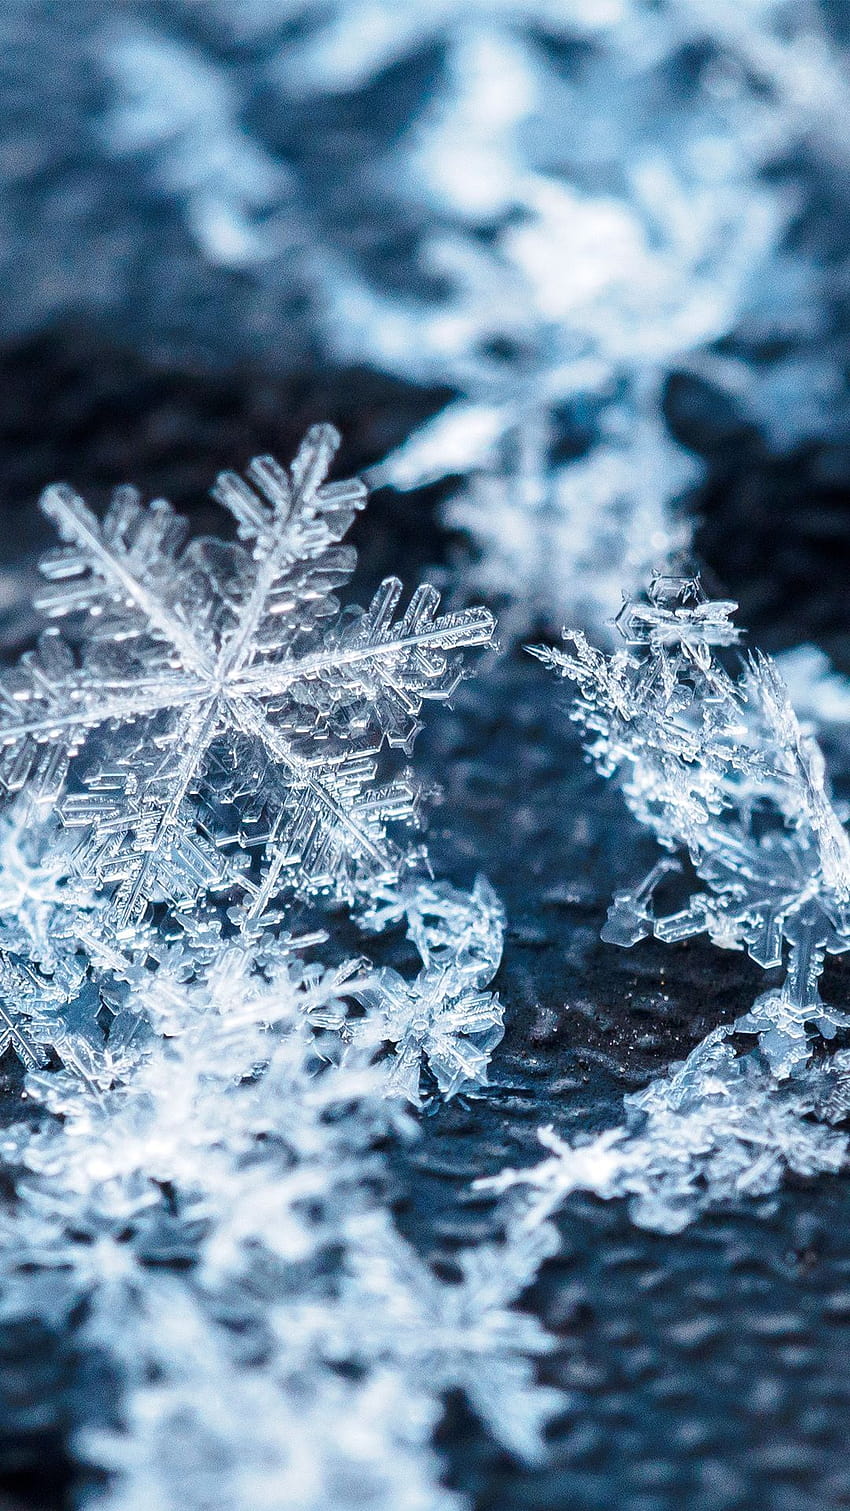 1920x1080px, 1080P Free download | Snowflakes ️ in 2020, aesthetic ...